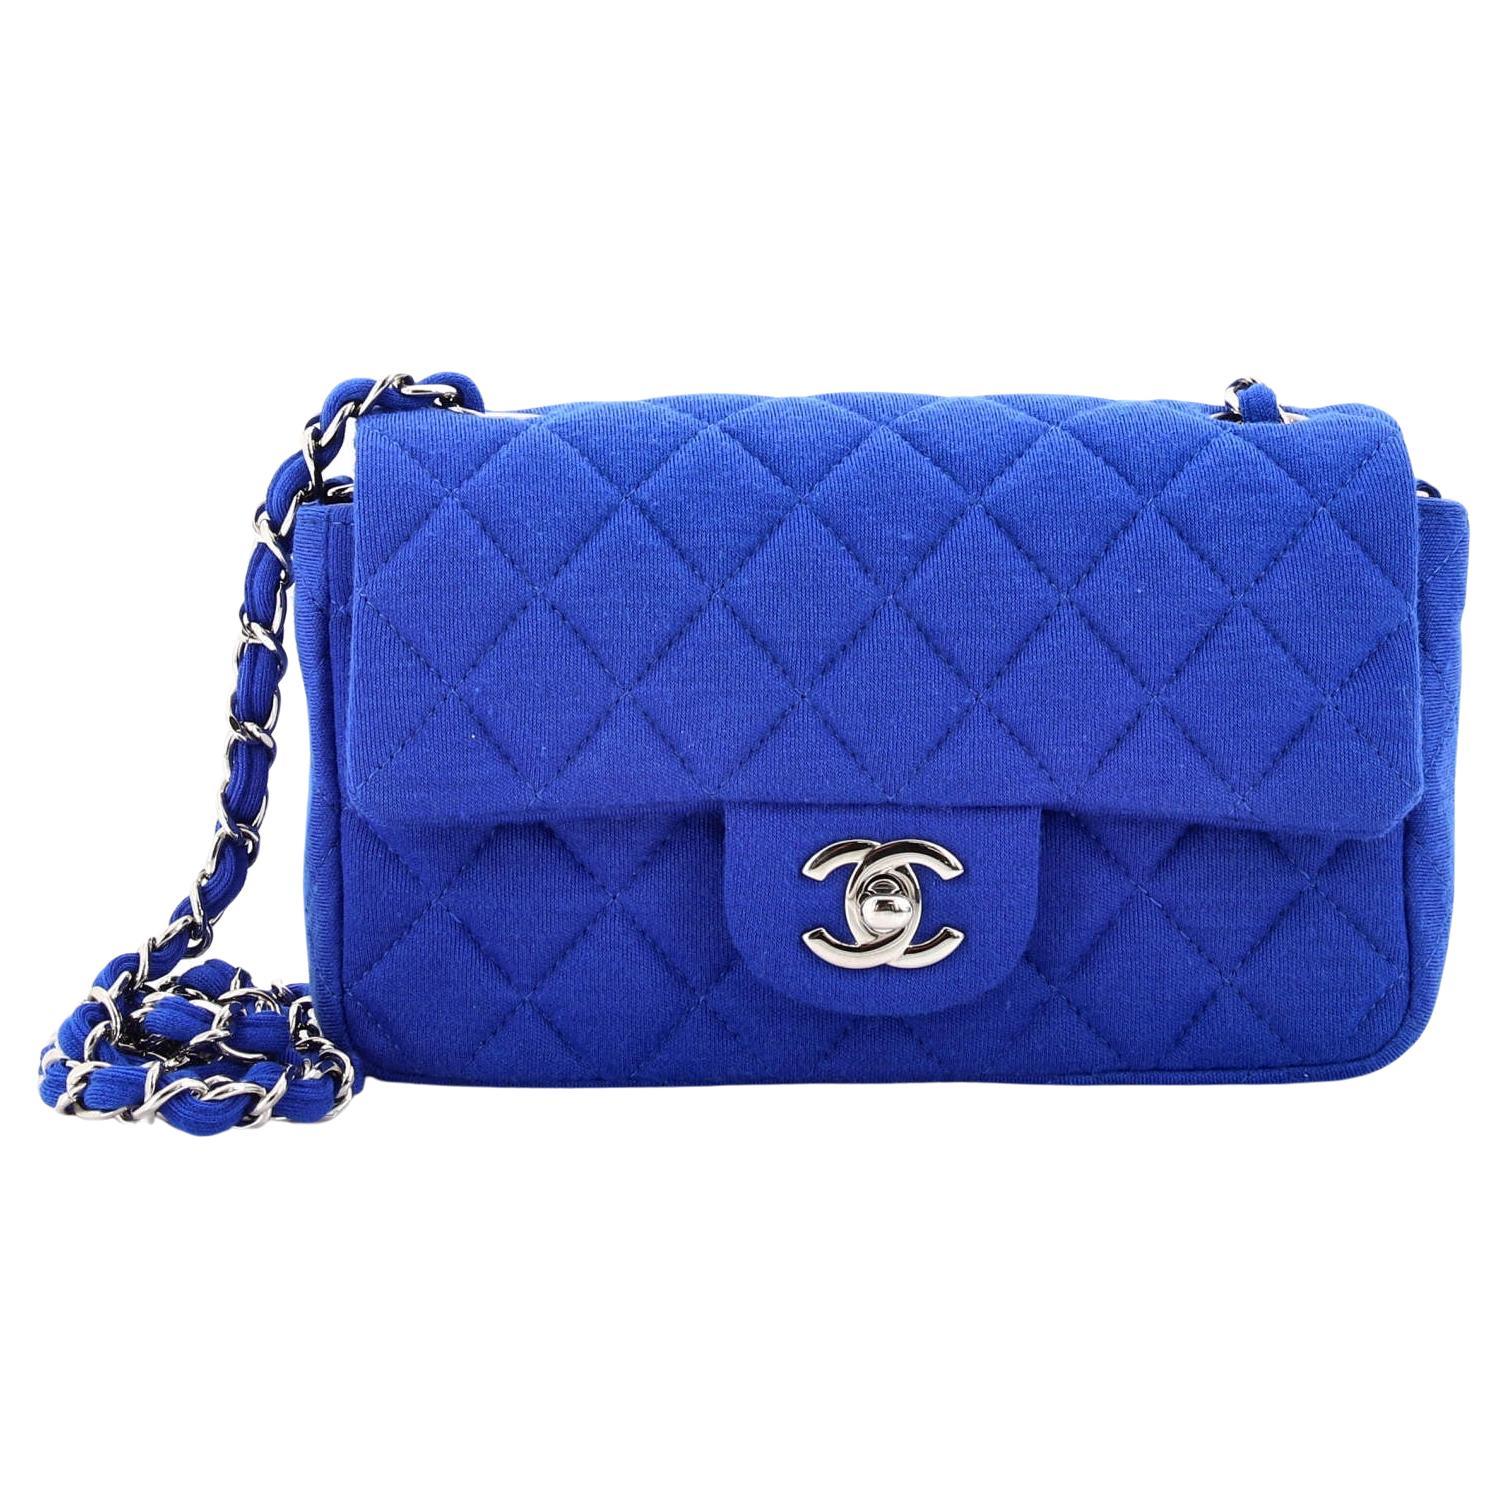 Chanel Jersey Bubble Bag - For Sale on 1stDibs